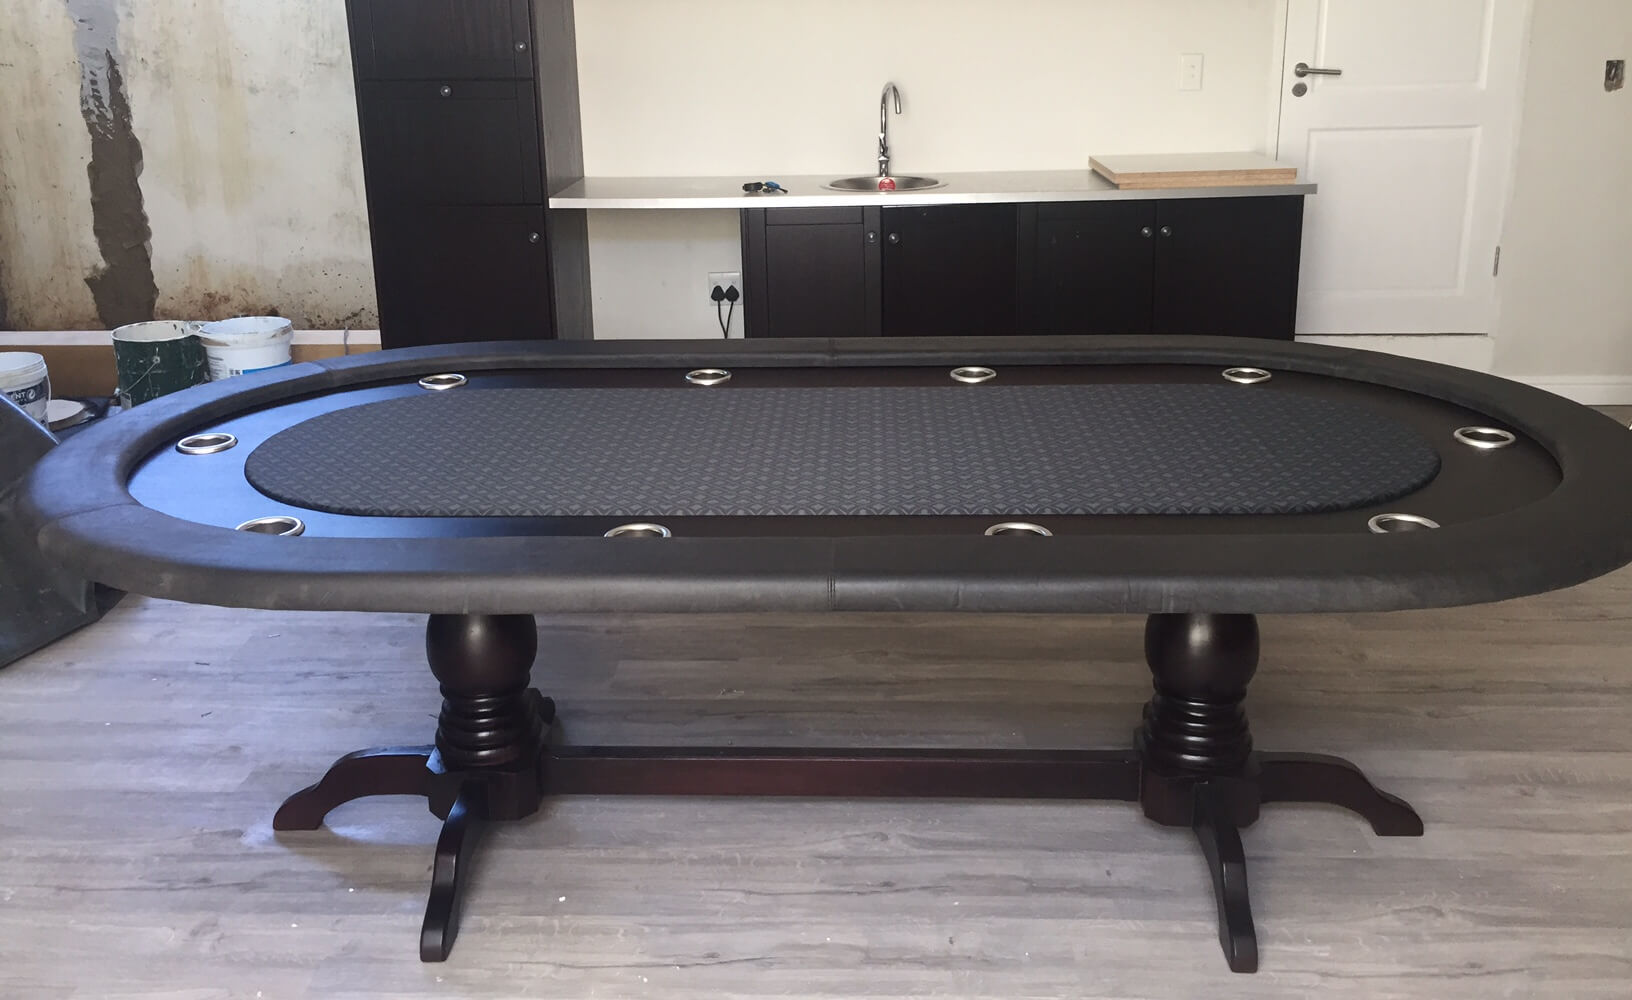 Stadium-Shaped Converted Poker Table with LEDs - Steamboat Tables Custom Poker Tables (1)